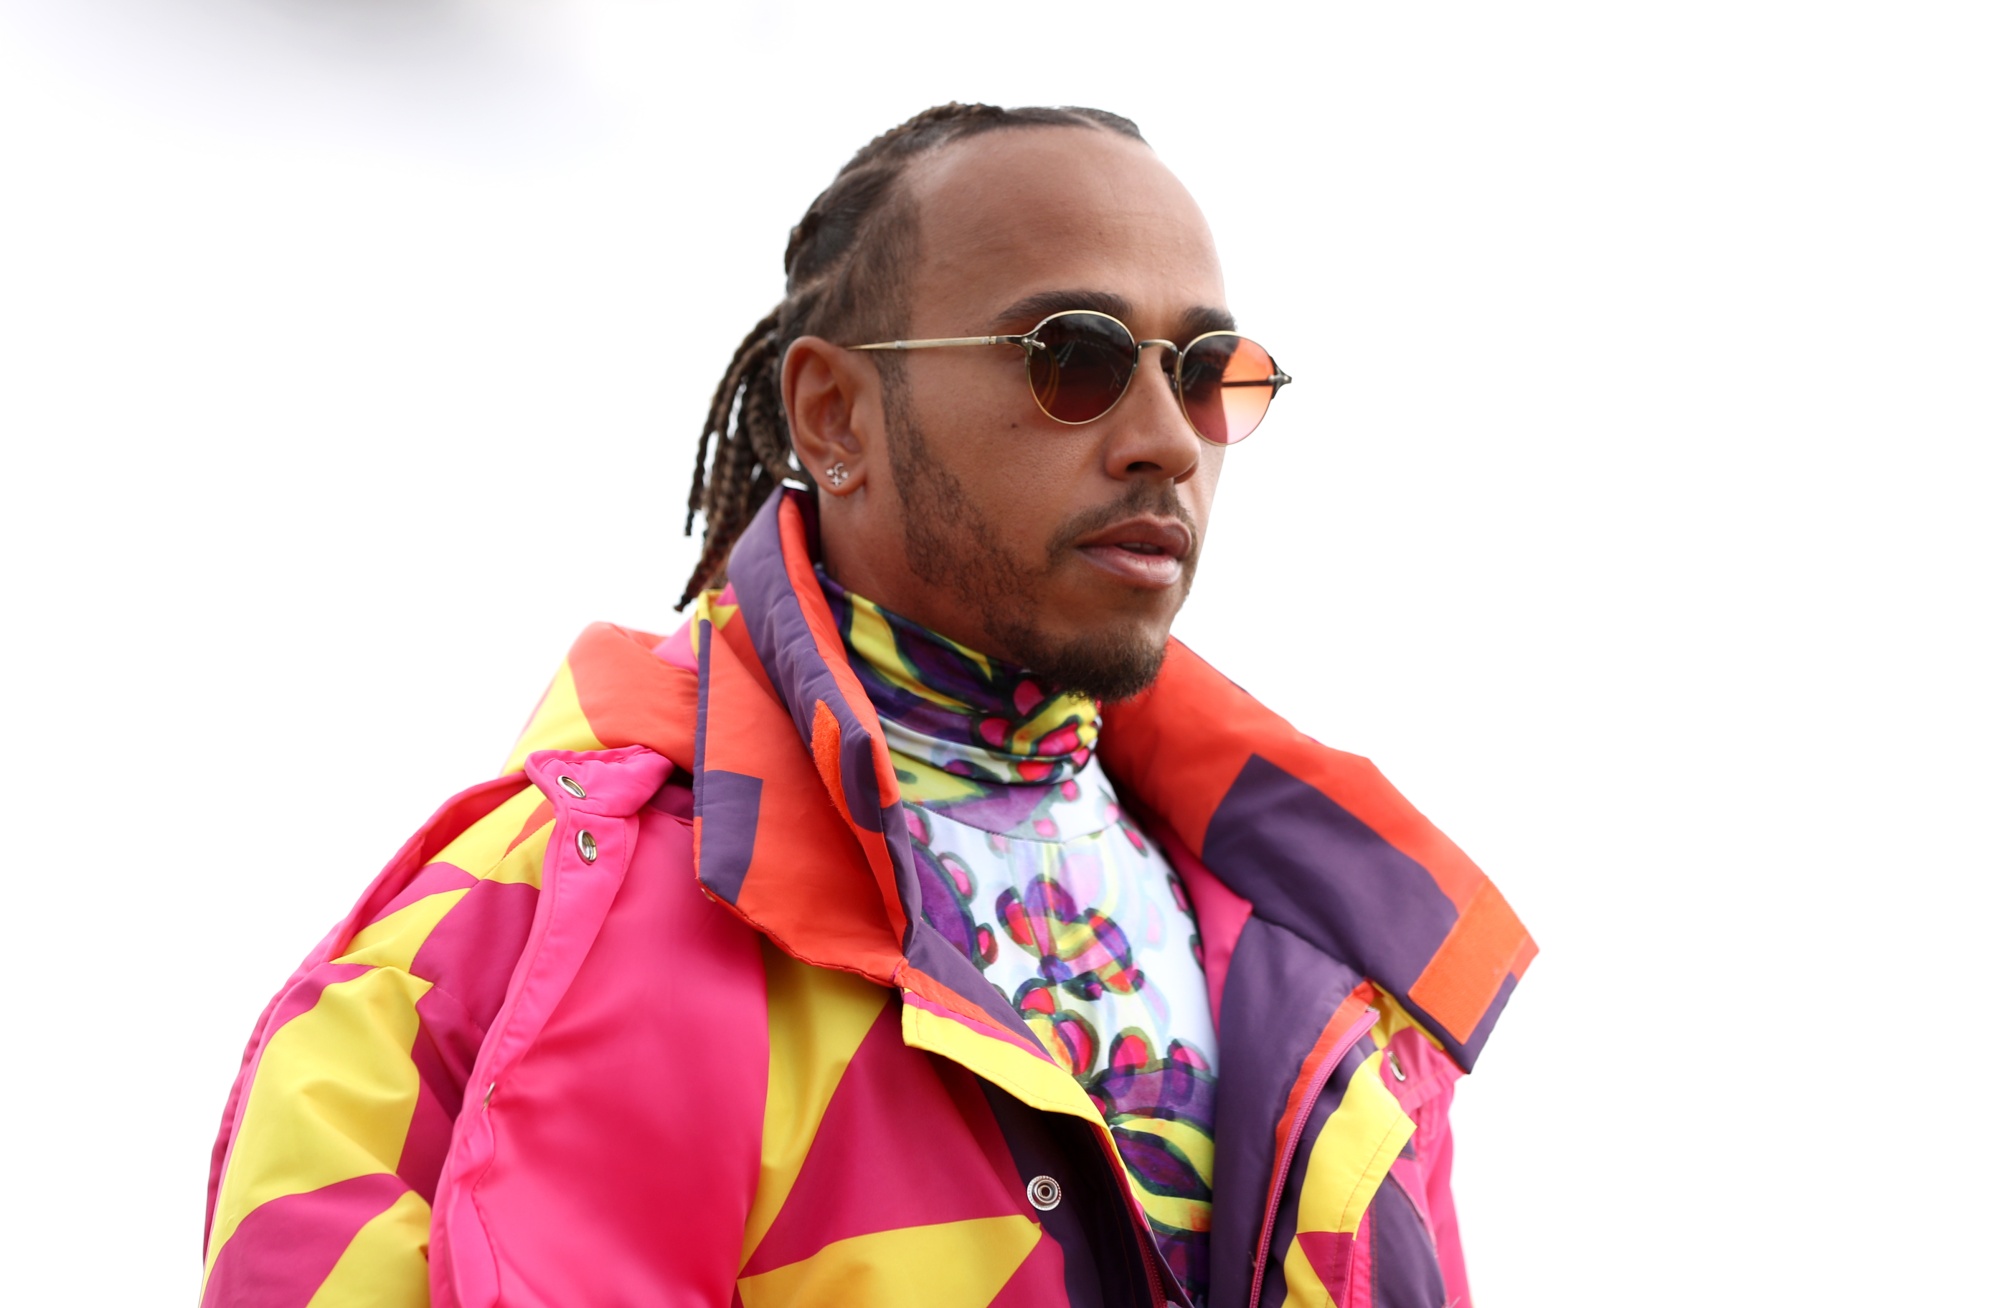 Lewis Hamilton showcases his quirky sense of style in a £5,000 Louis Vuitton  suit at British F1